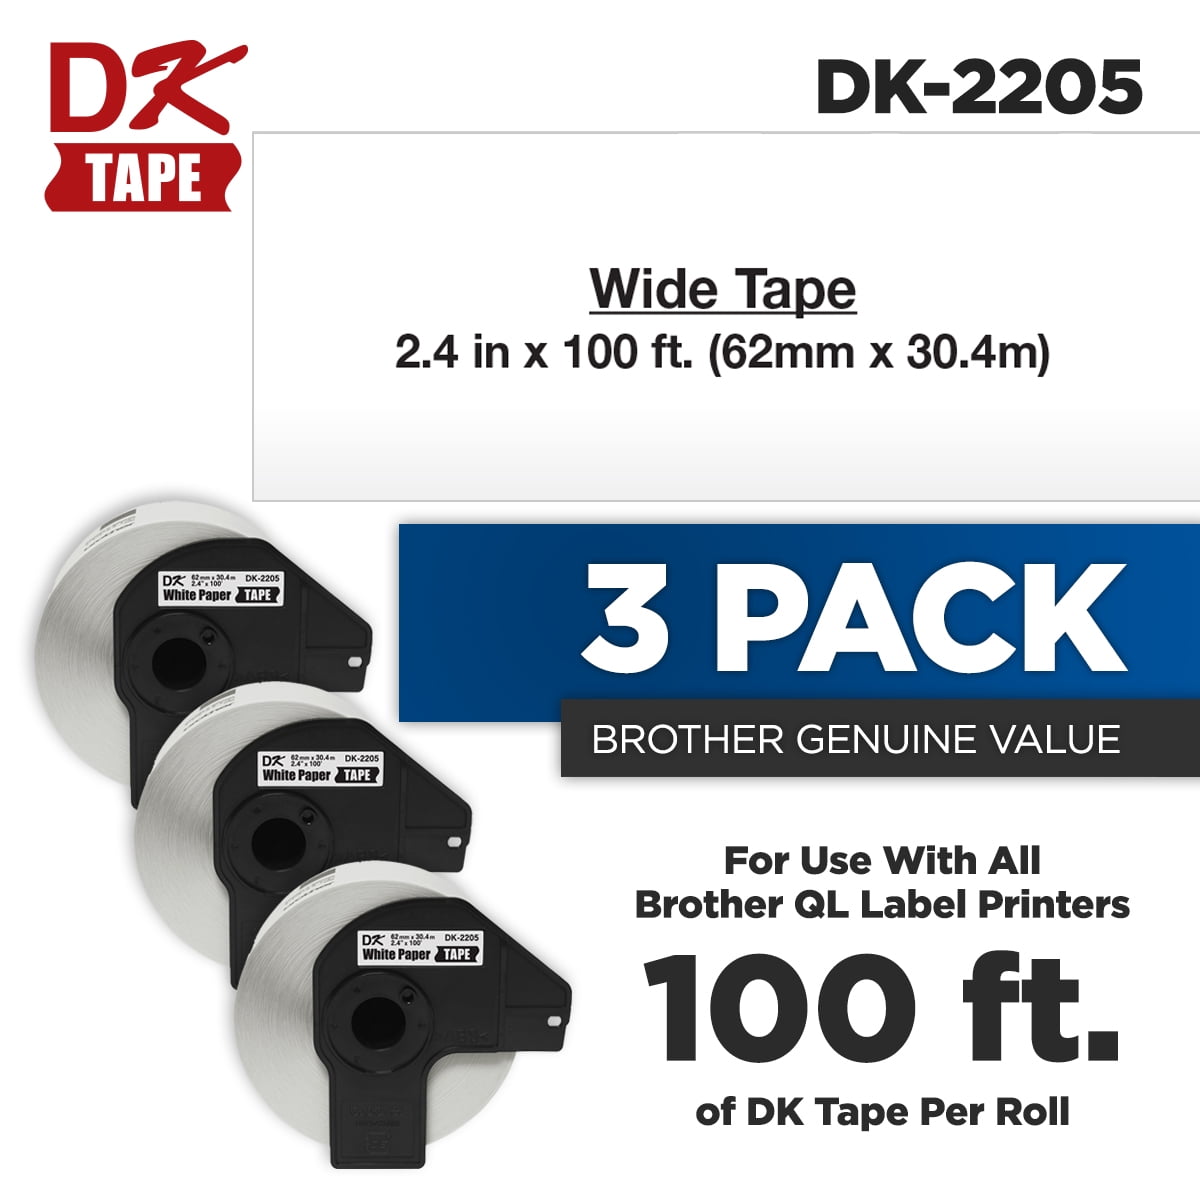 4 DK-2205 Replacement Rolls Compatible w/ Brother w/ Frames 